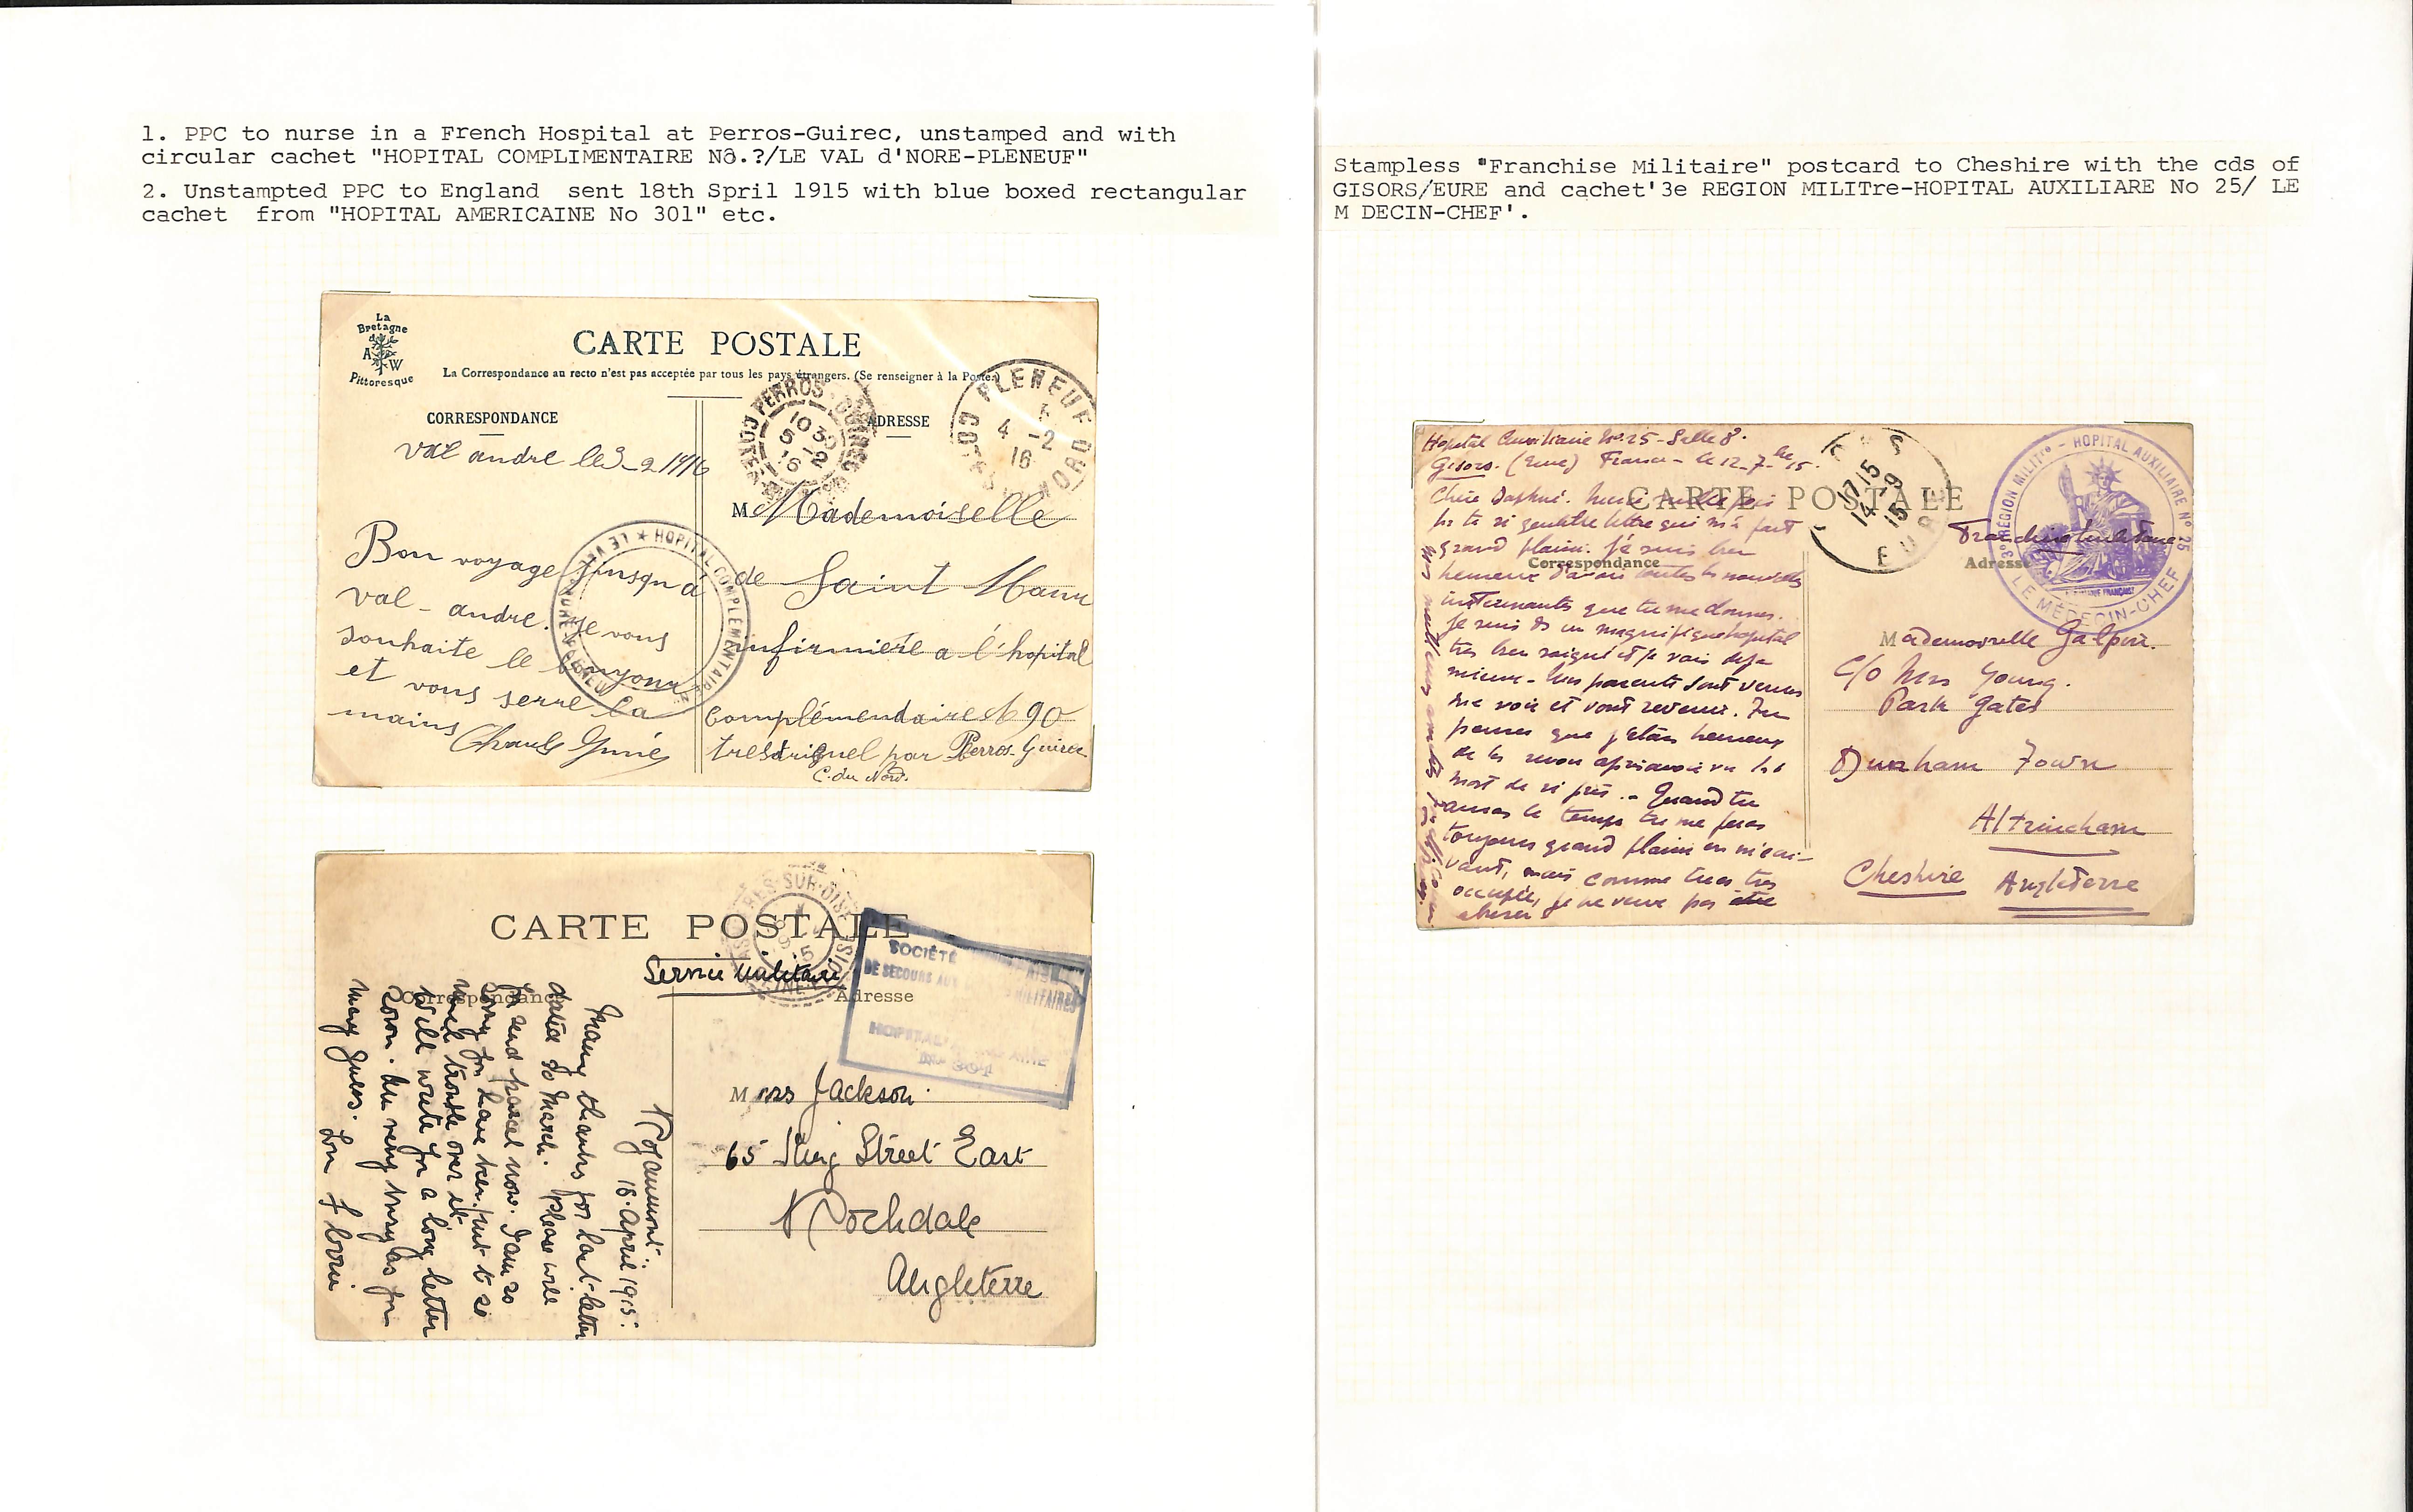 France/Italy. 1914-18 Covers and cards from soldiers in hospitals in France (26) or Italy (5), - Image 7 of 12